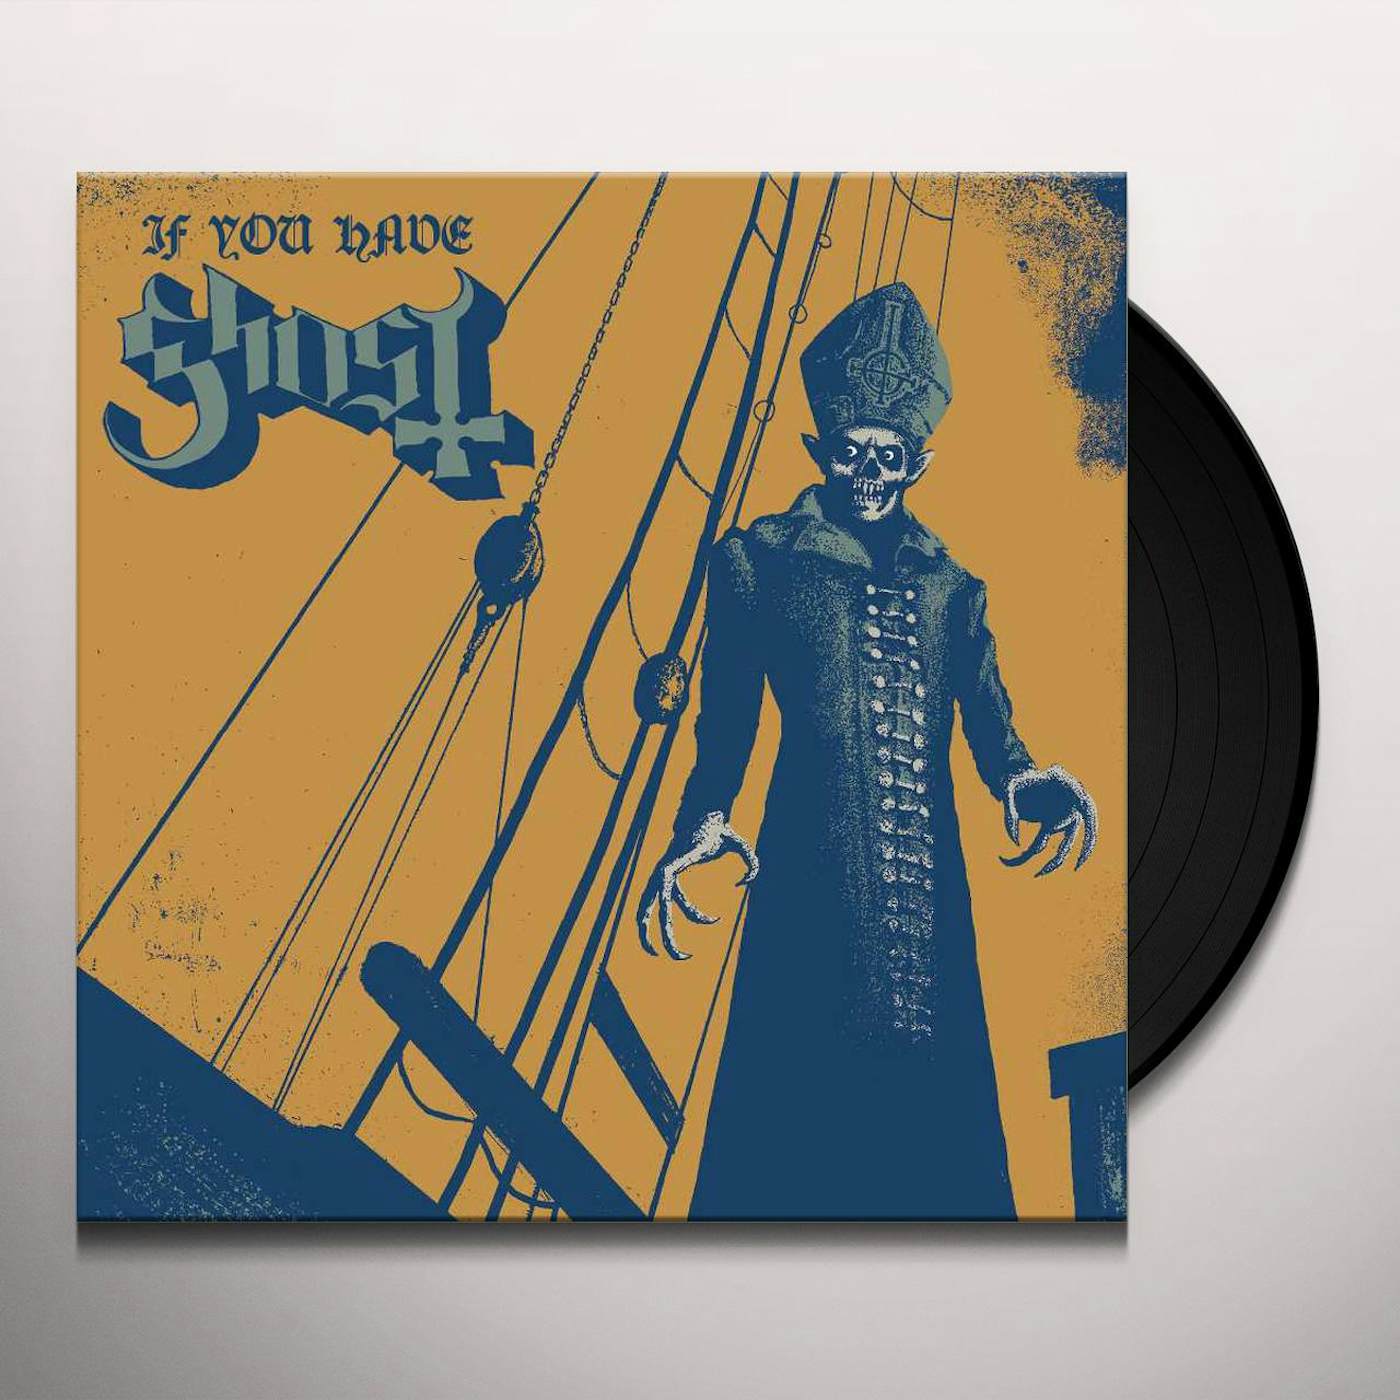 If You Have Ghost Vinyl Record